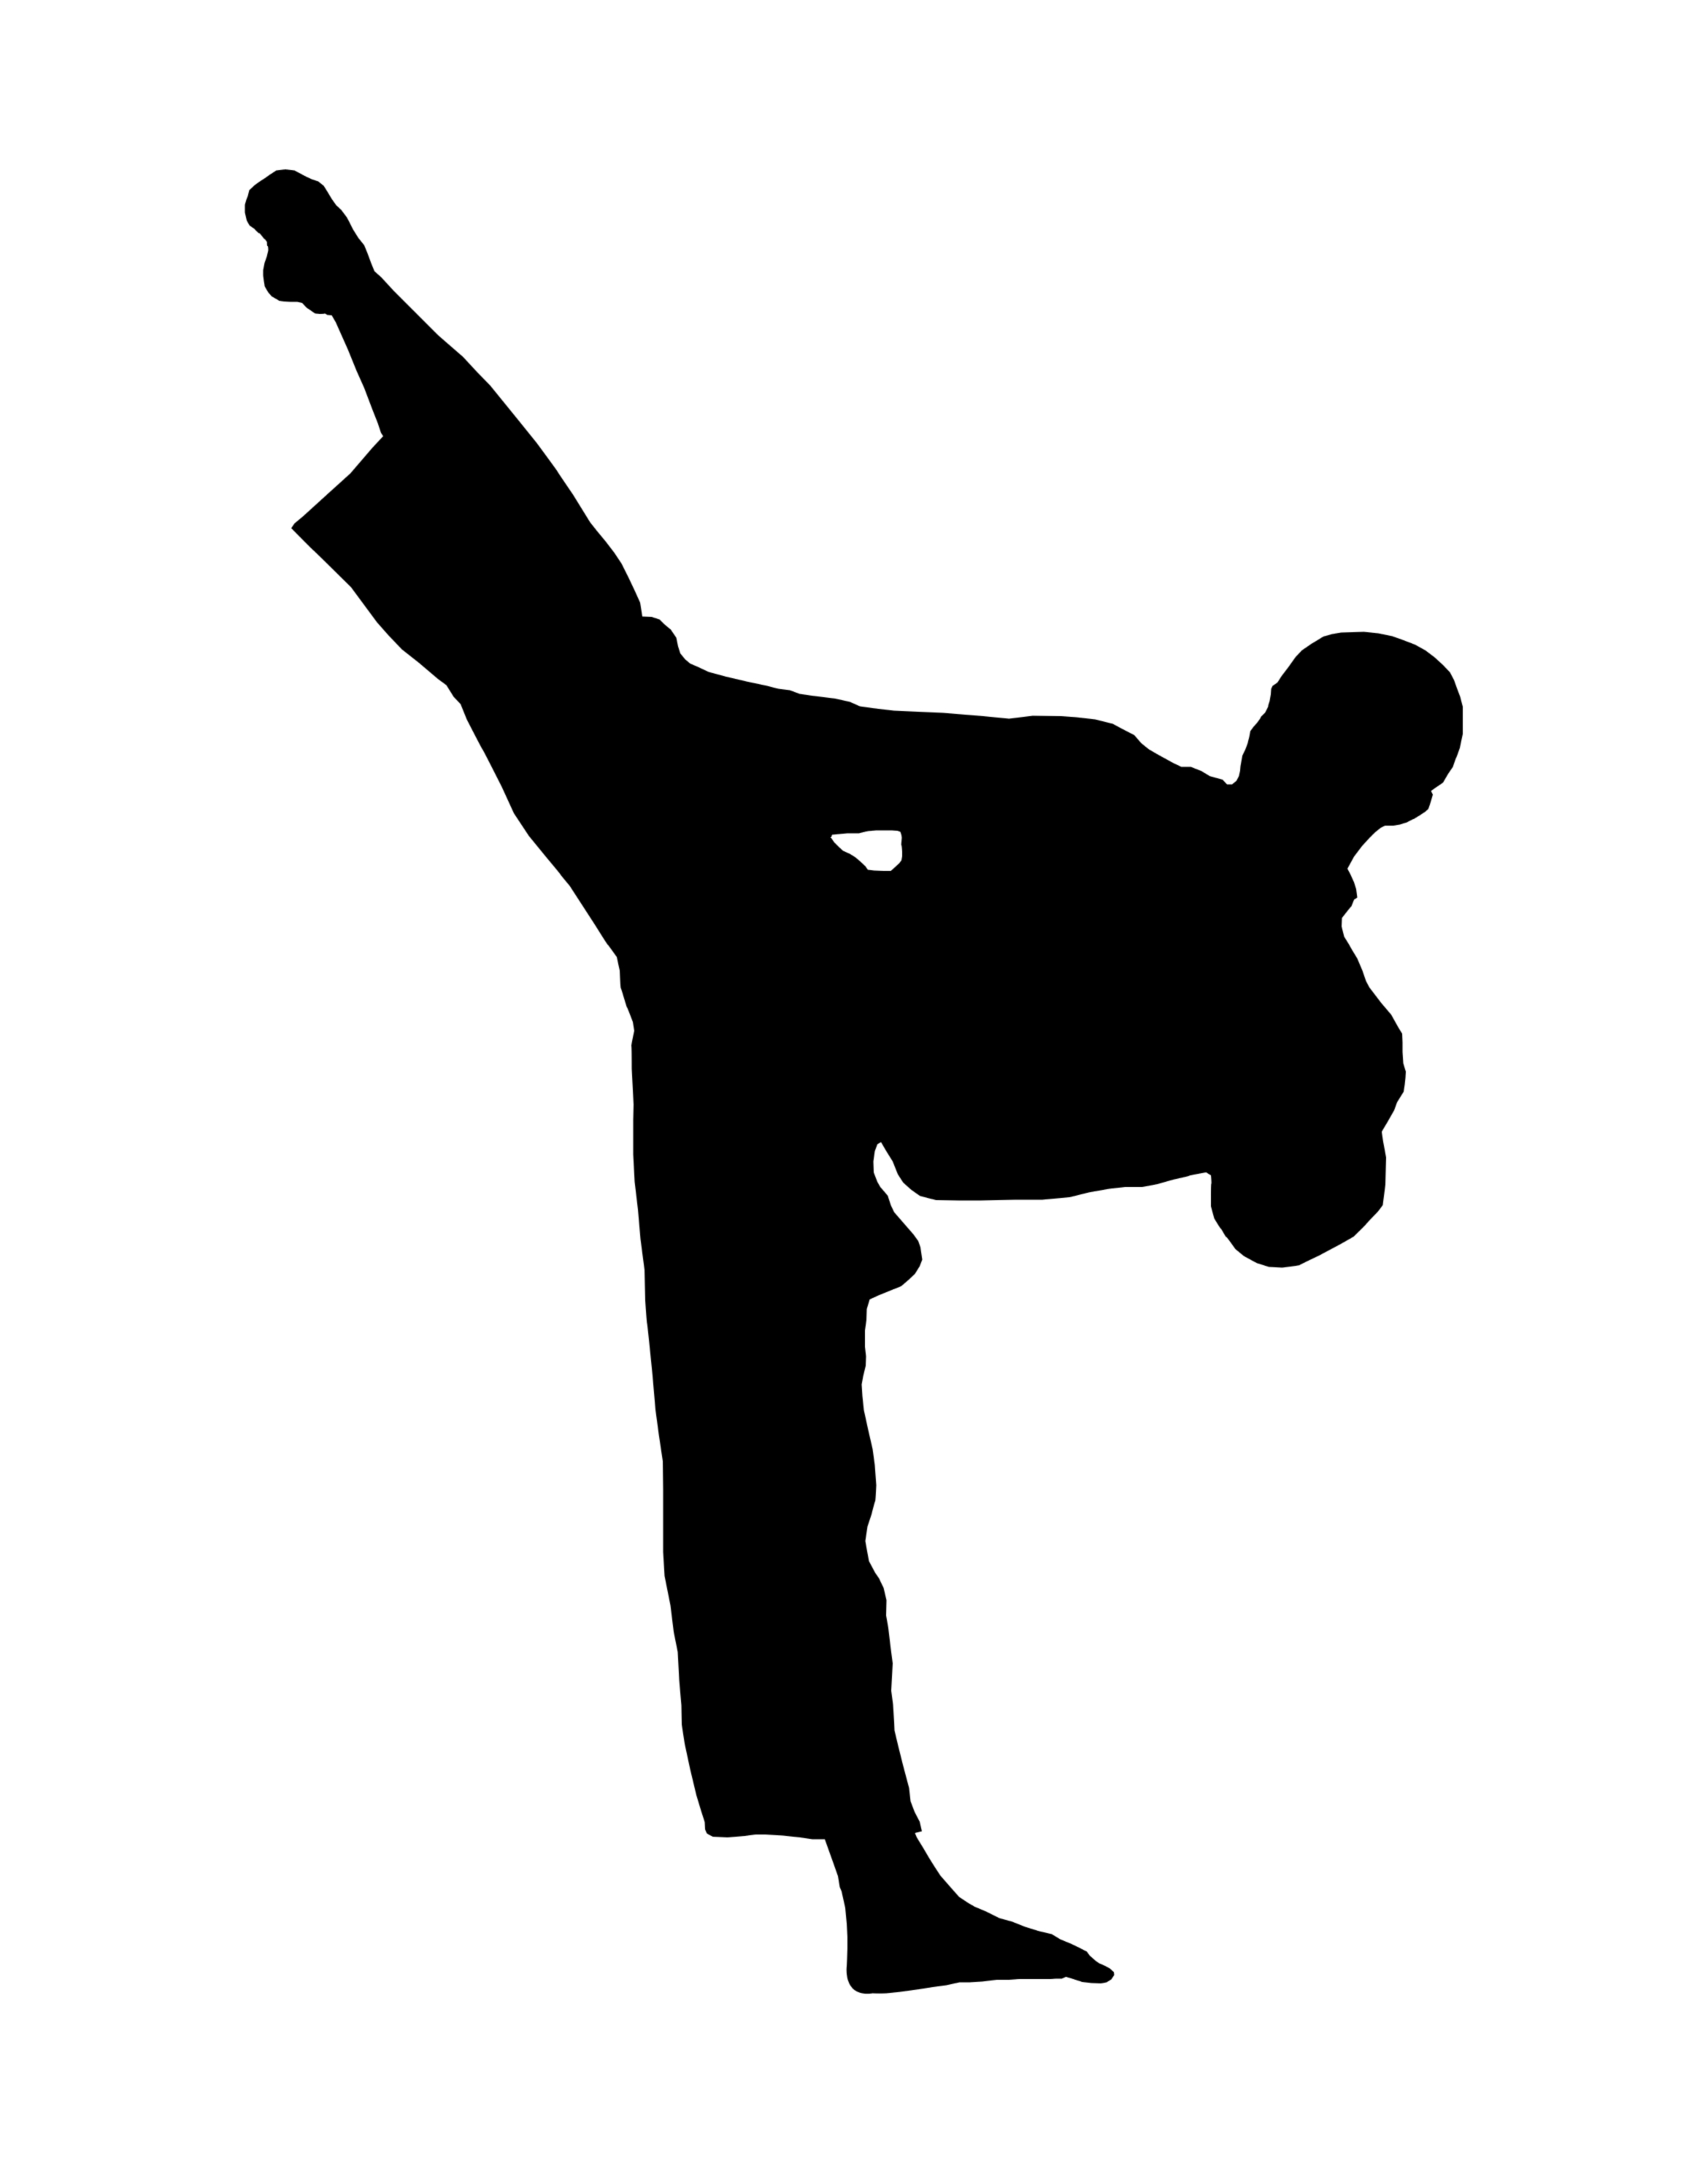 Karate silhouette and vector free download on cliparts - Clipartix